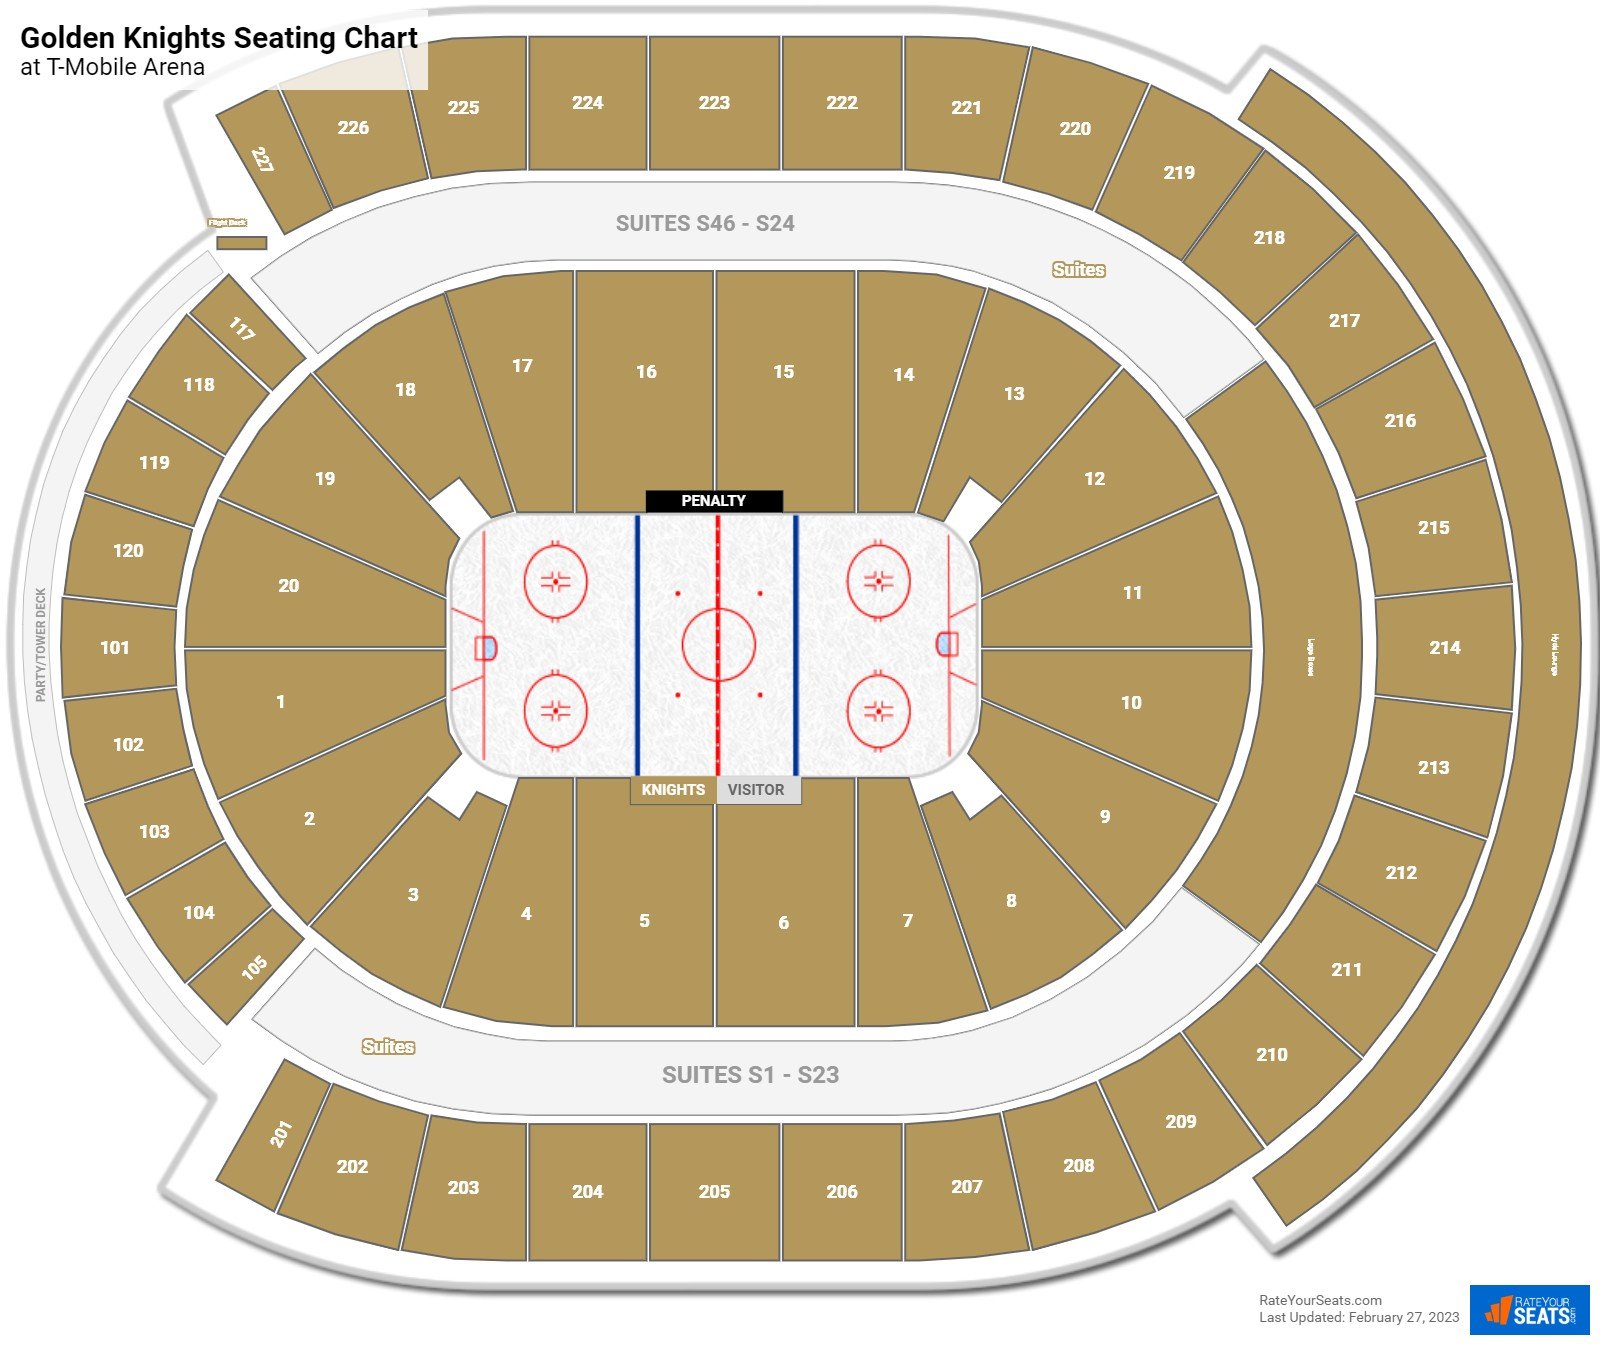 Vegas Golden Knights Seating Chart at T-Mobile Arena